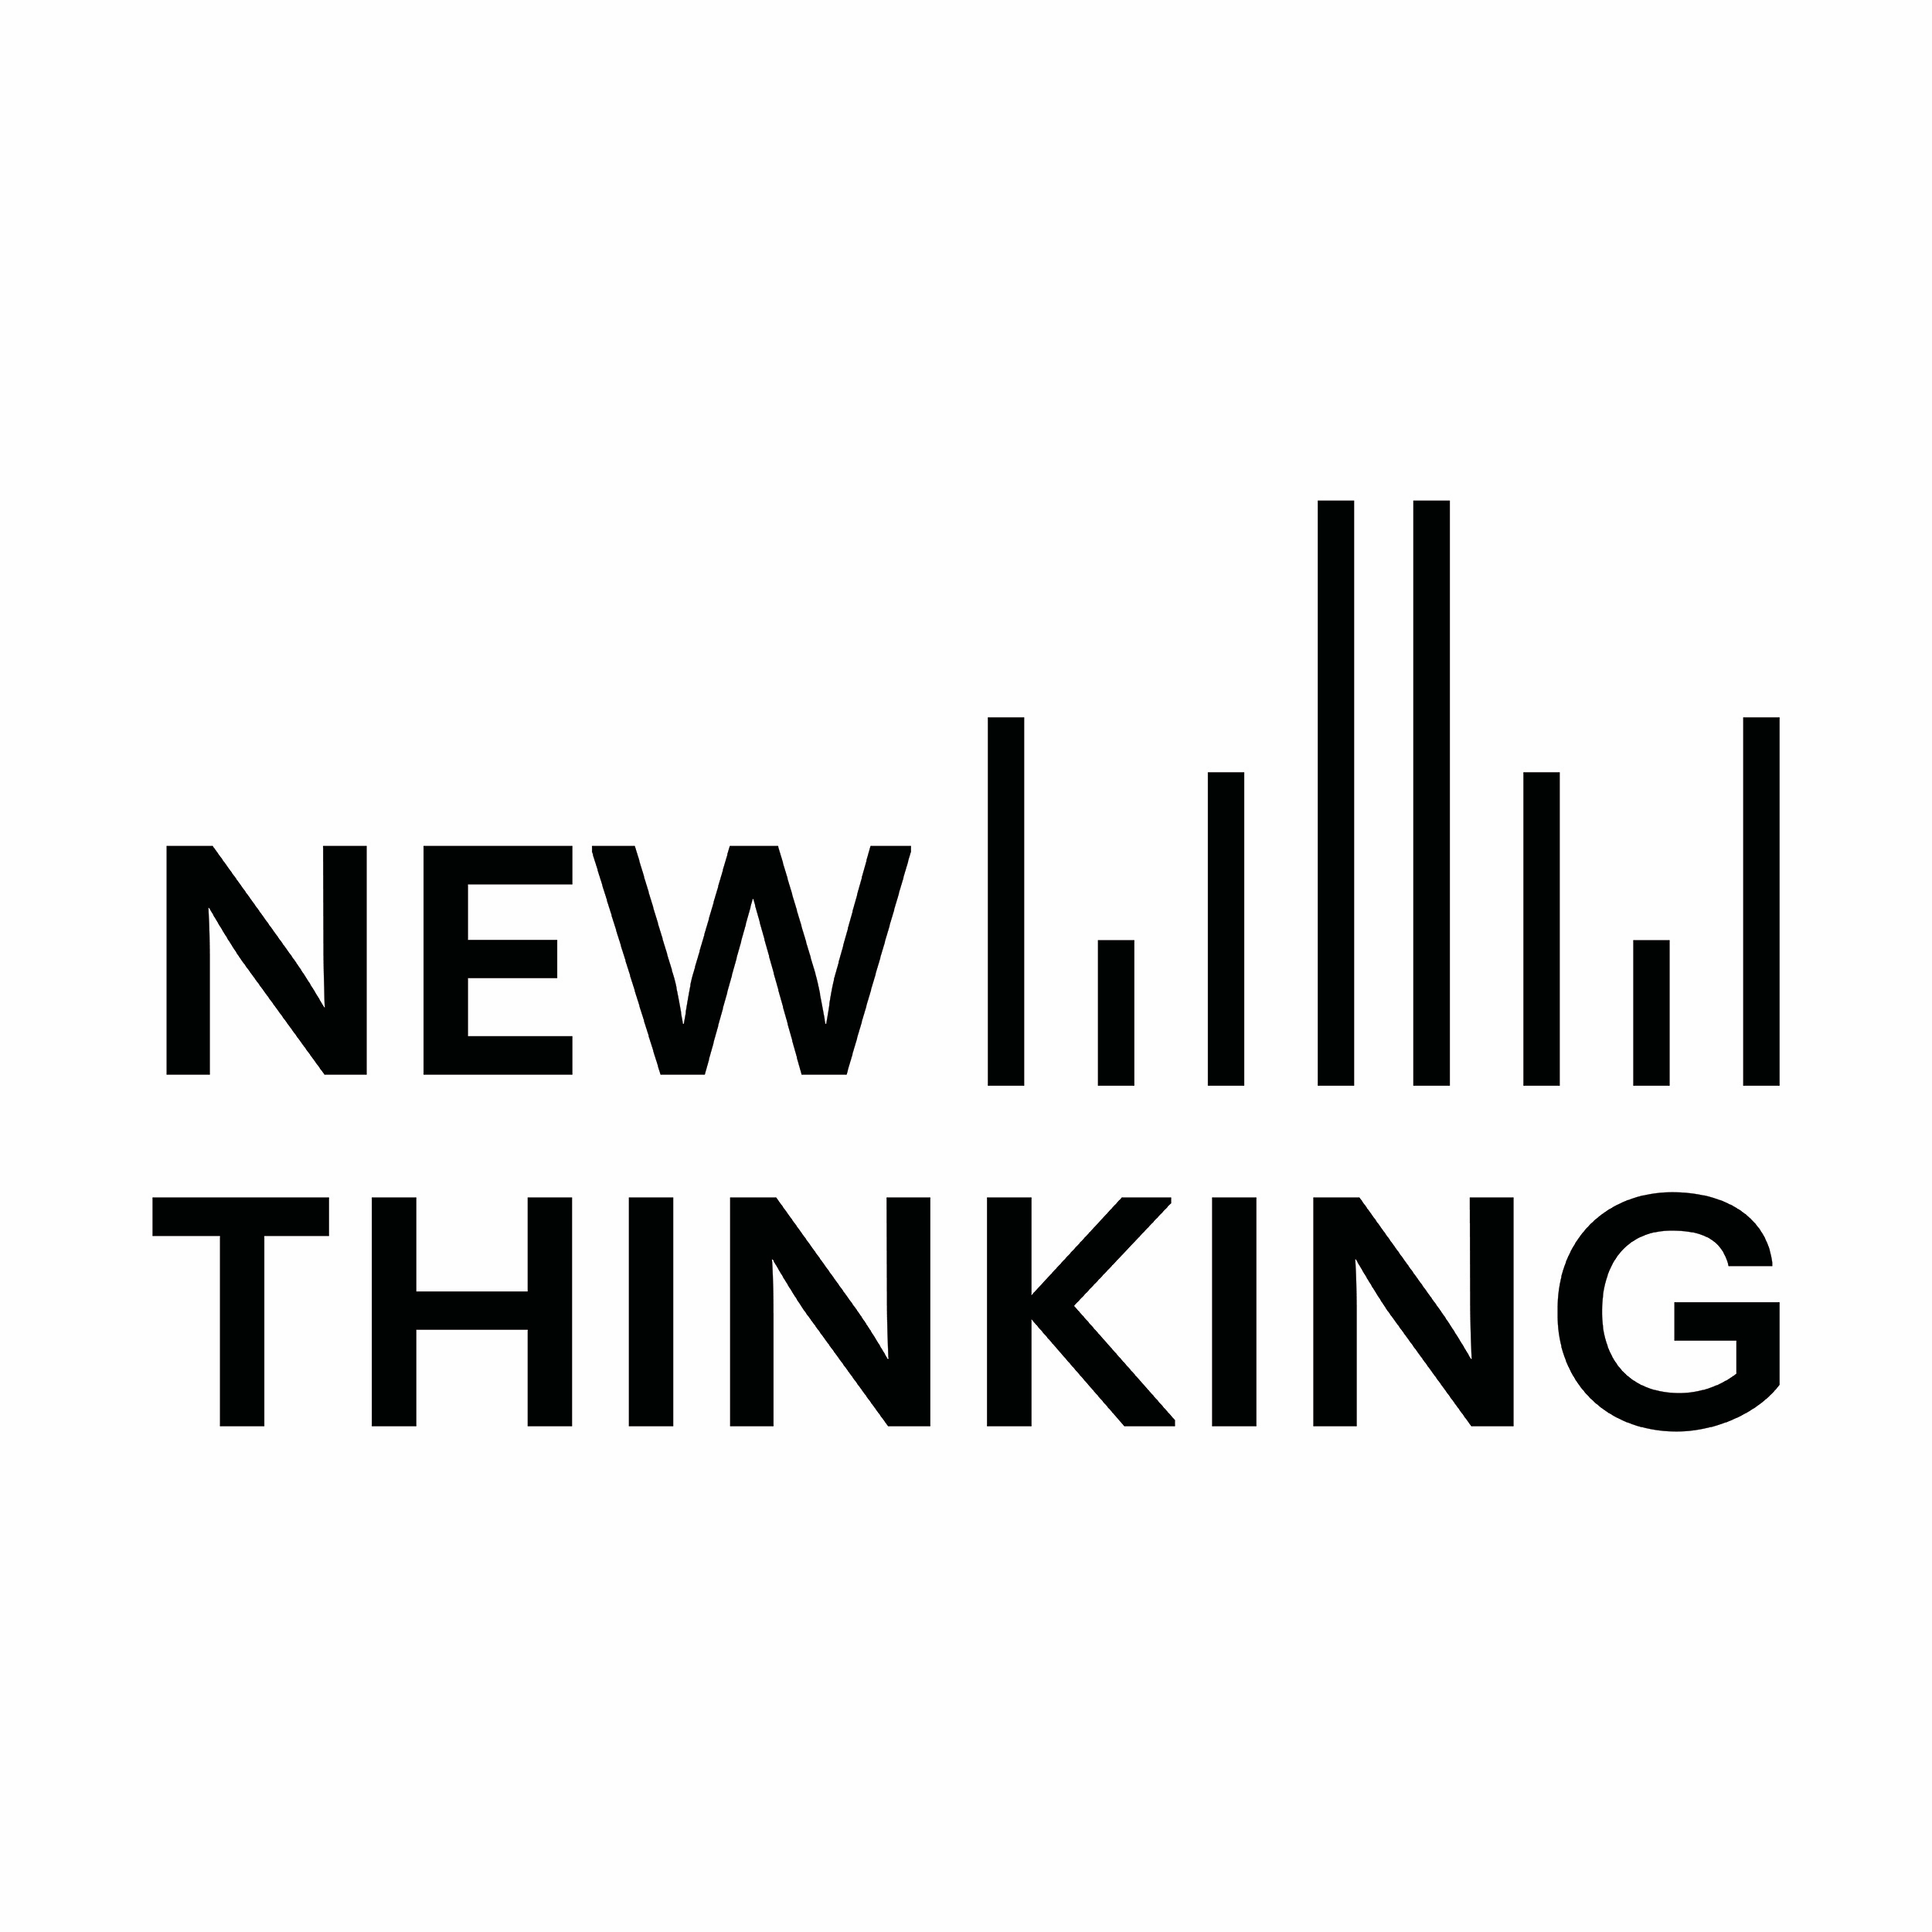 New Thinking, from the Center for Justice Innovation